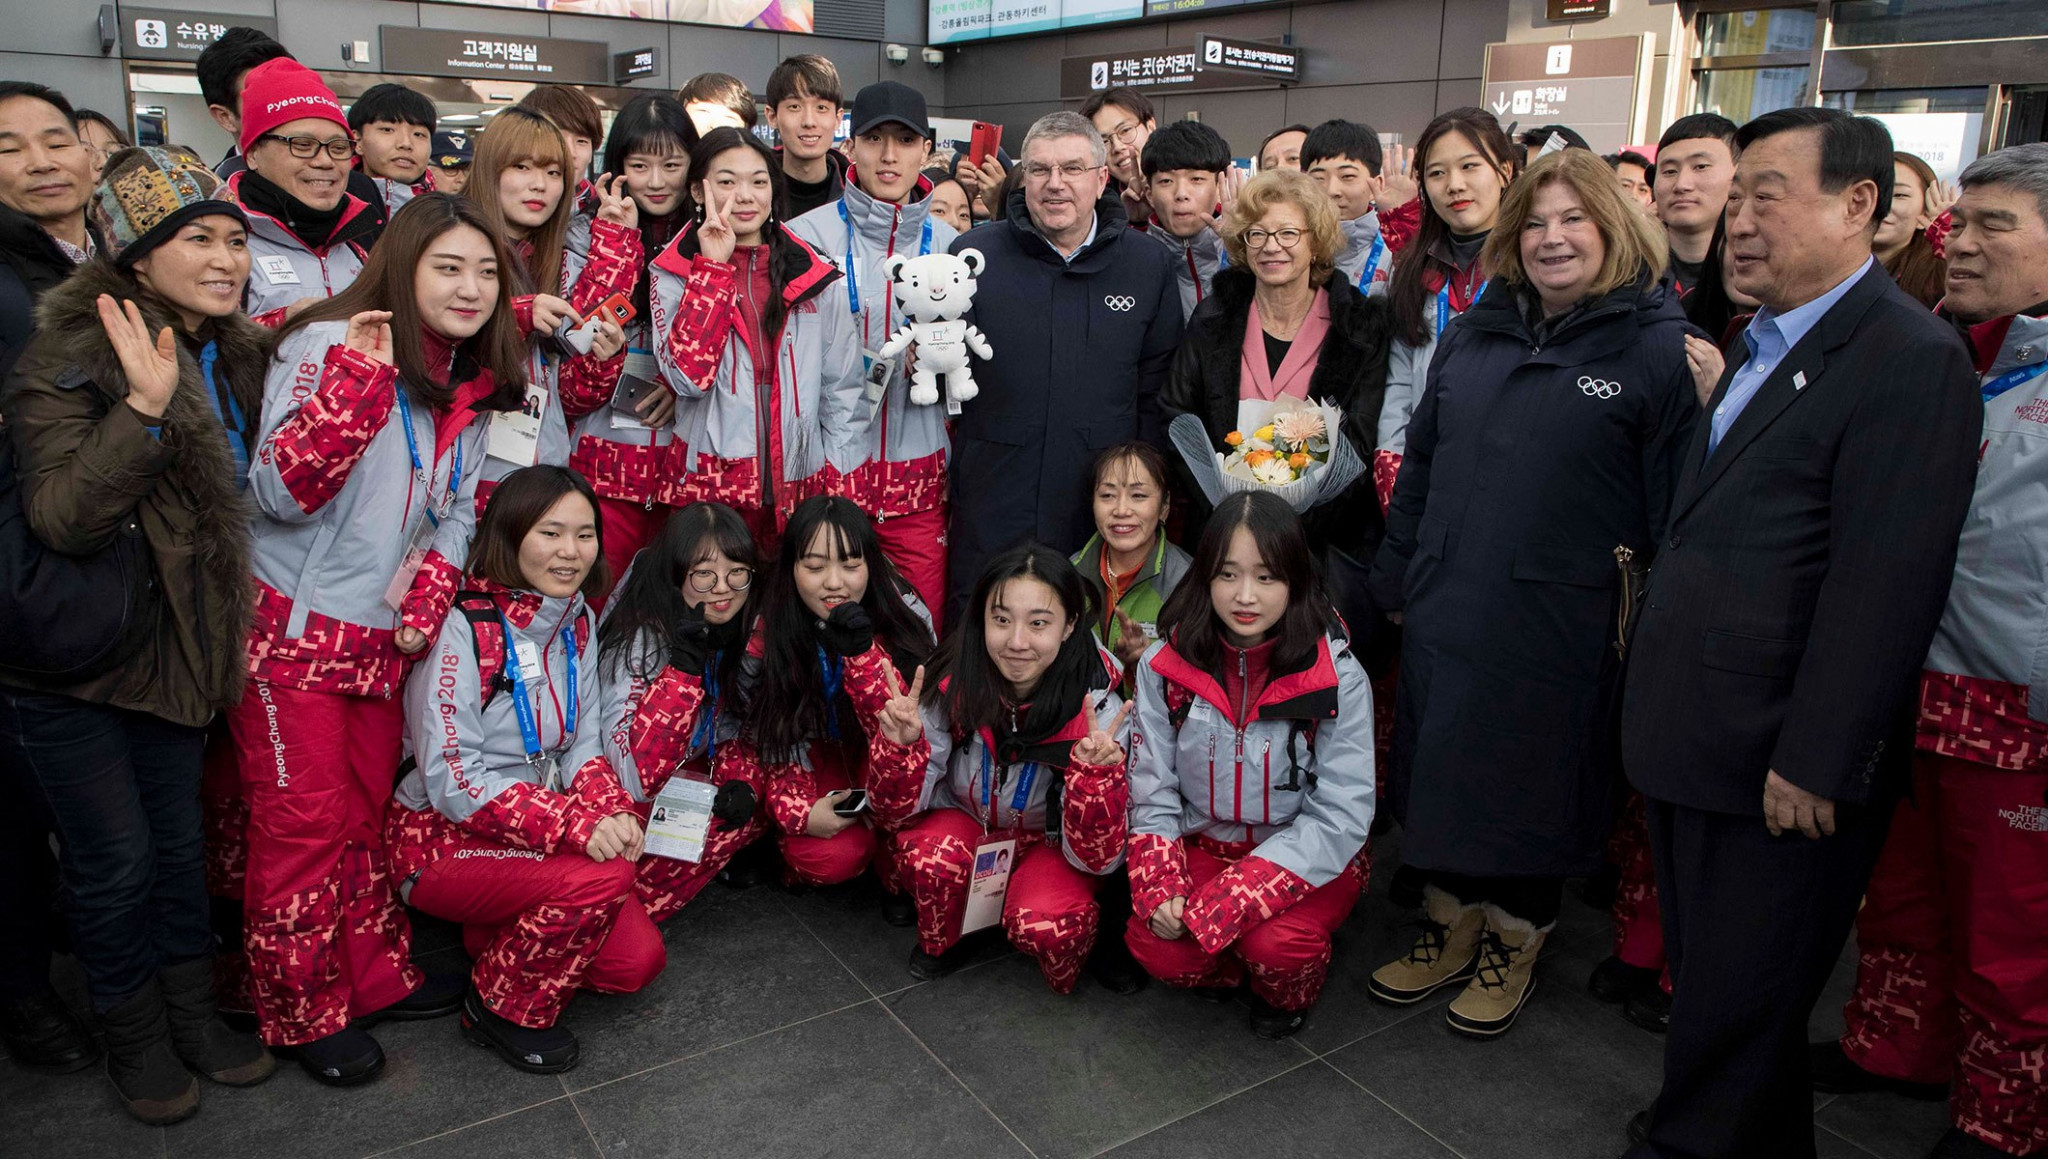 Bach discusses joint Korean ice hockey team after arriving in Pyeongchang